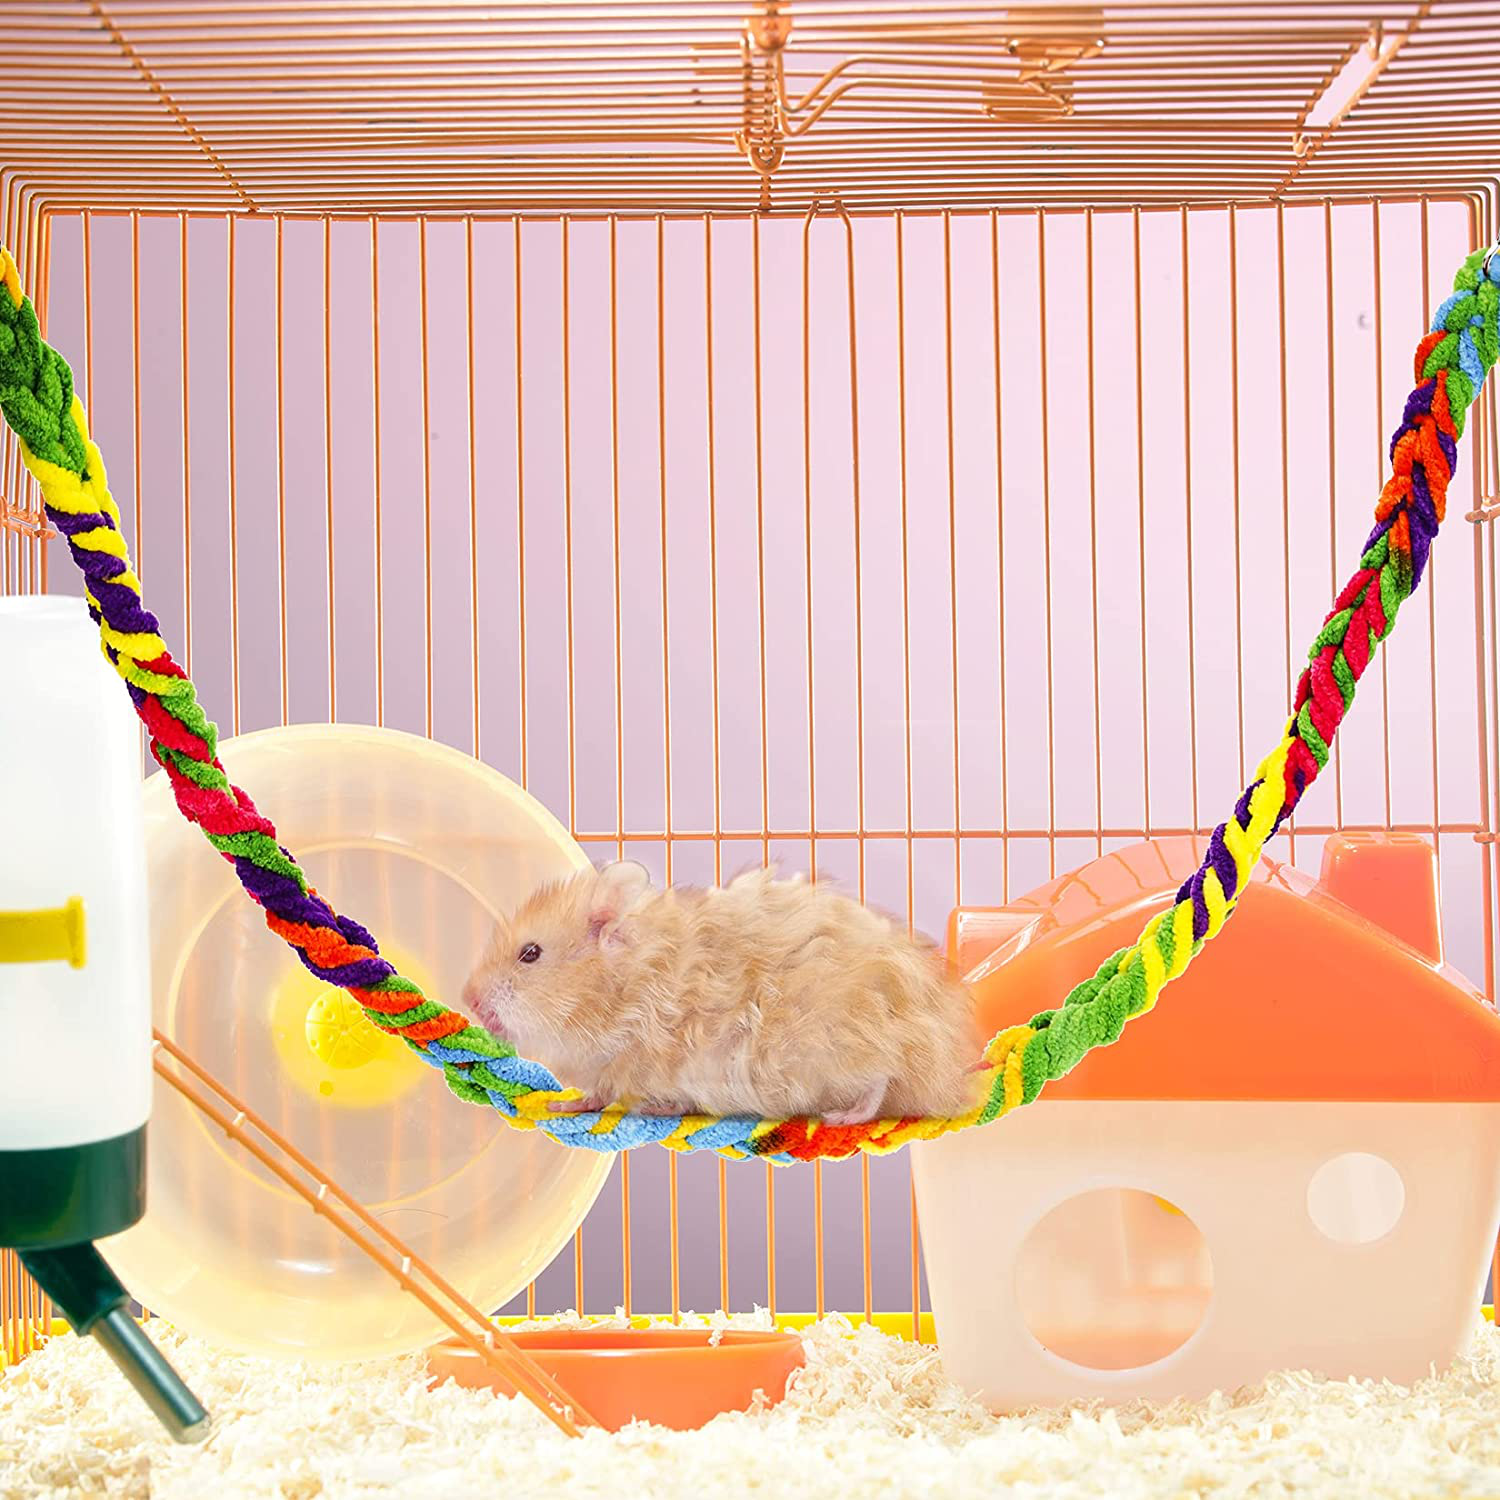 Jiebor 6Pcs Sugar Glider Toys Cage Accessories Hanging Climbing Rope for Rat Ferret Hamster Parrot Small Birds Animal